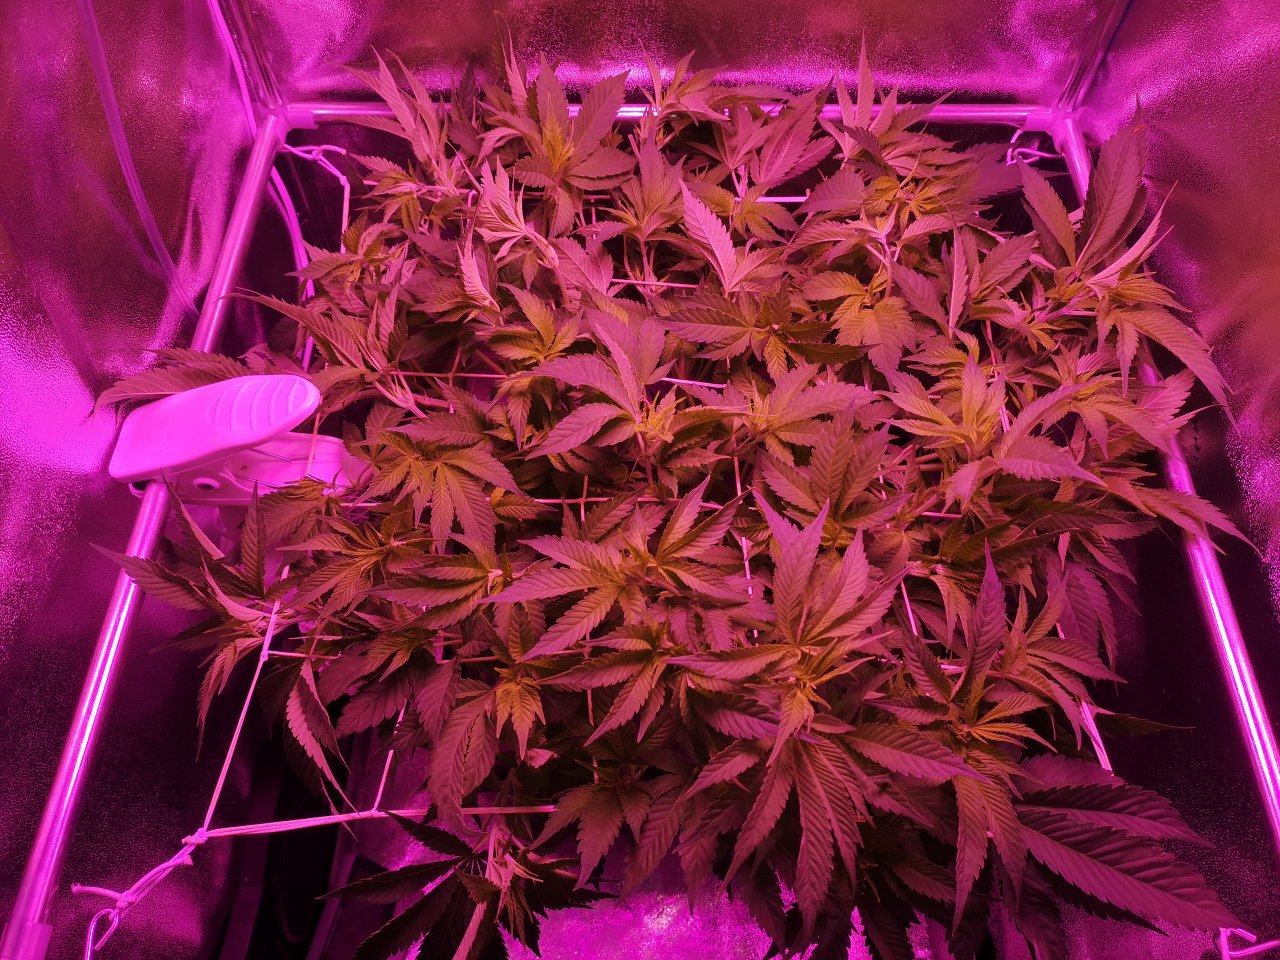 Jack Herer - w10d6 - not a lot of places to bend stuff